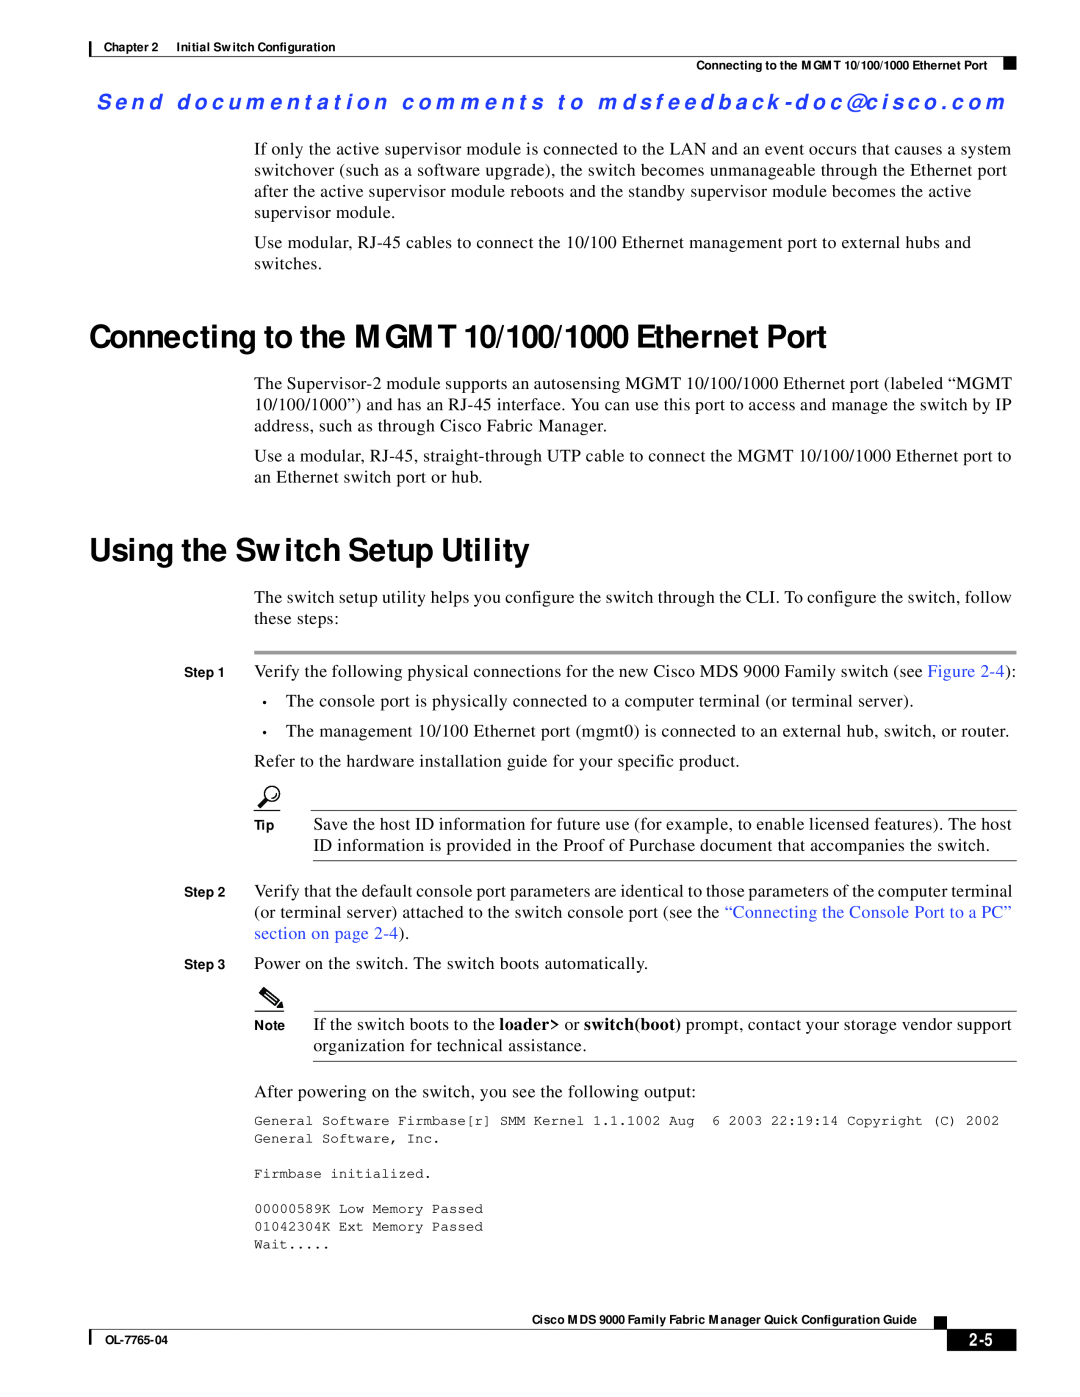 Cisco Systems OL-7765-04 manual Connecting to the MGMT 10/100/1000 Ethernet Port, Using the Switch Setup Utility 